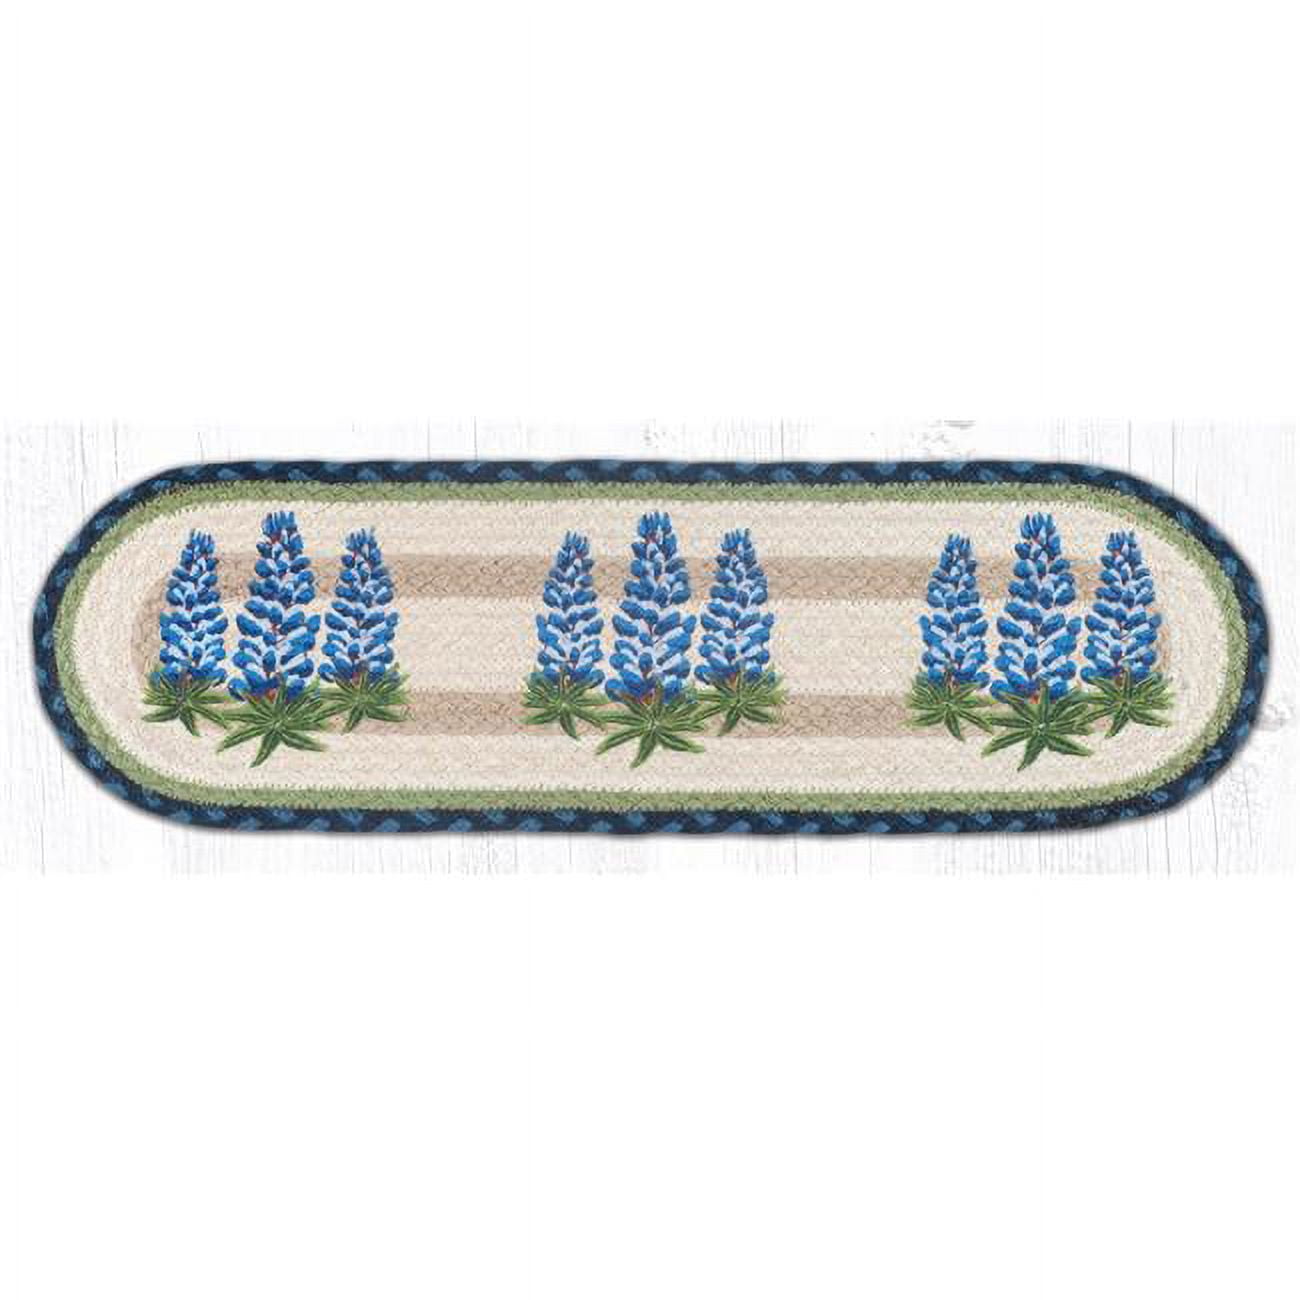 Picture of Capitol Importing 49-ST062B 27 x 8.25 in. ST-OP-62 Bluebonnets Oval Stair Tread Mat